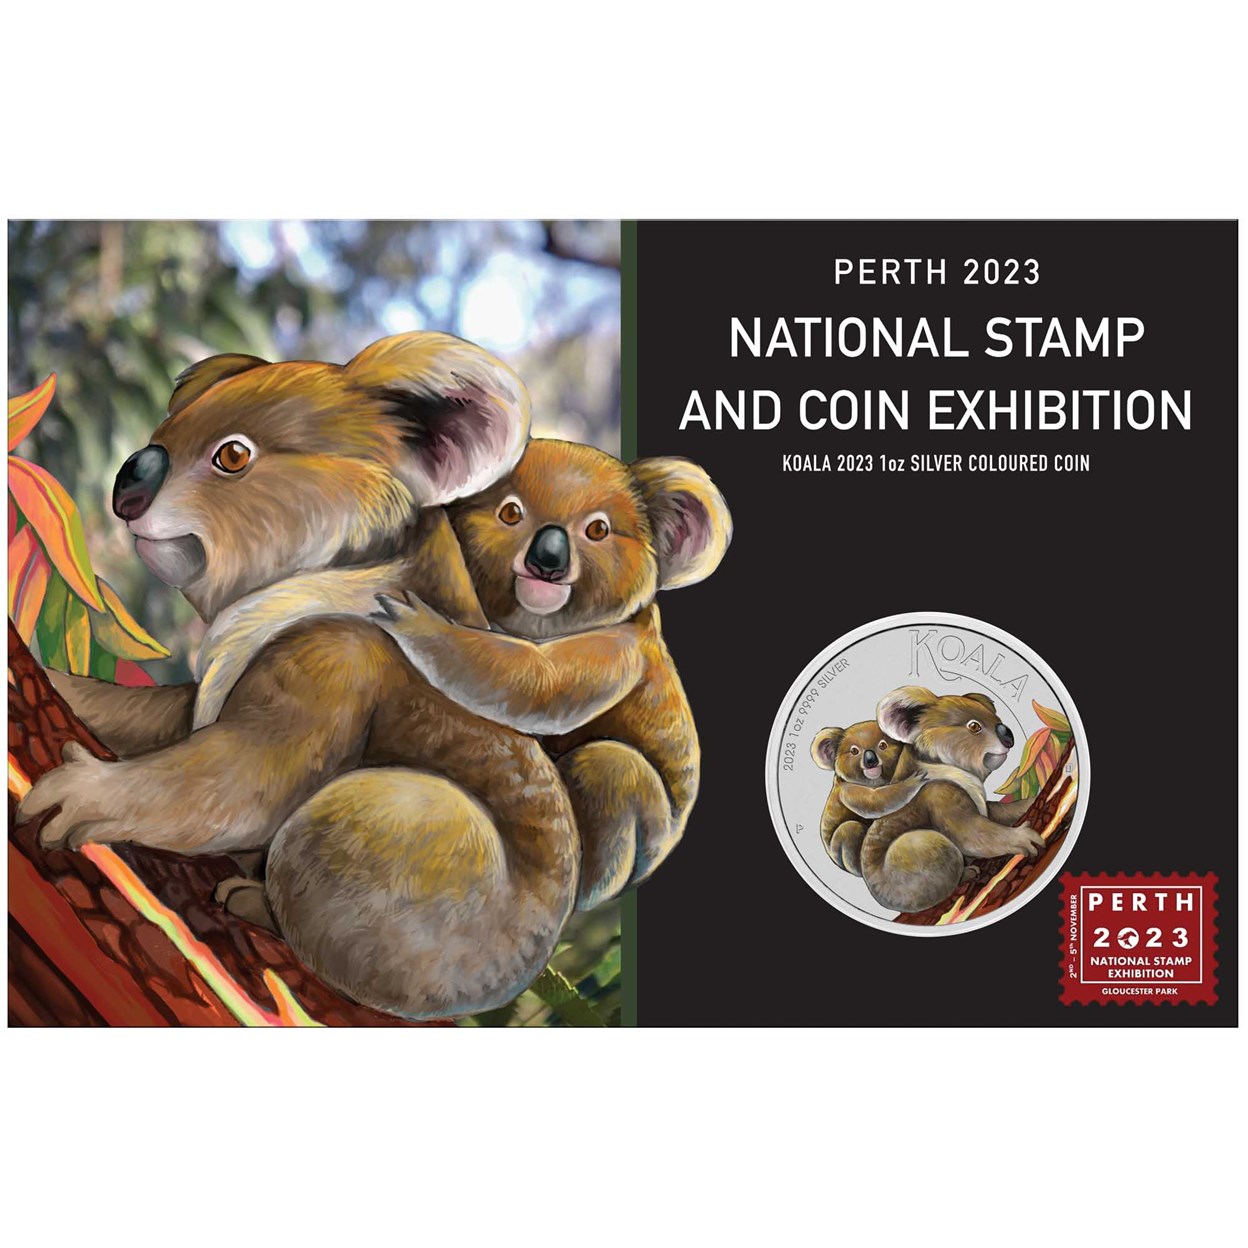 00 Perth 2023 National Stamp and Coin Exh